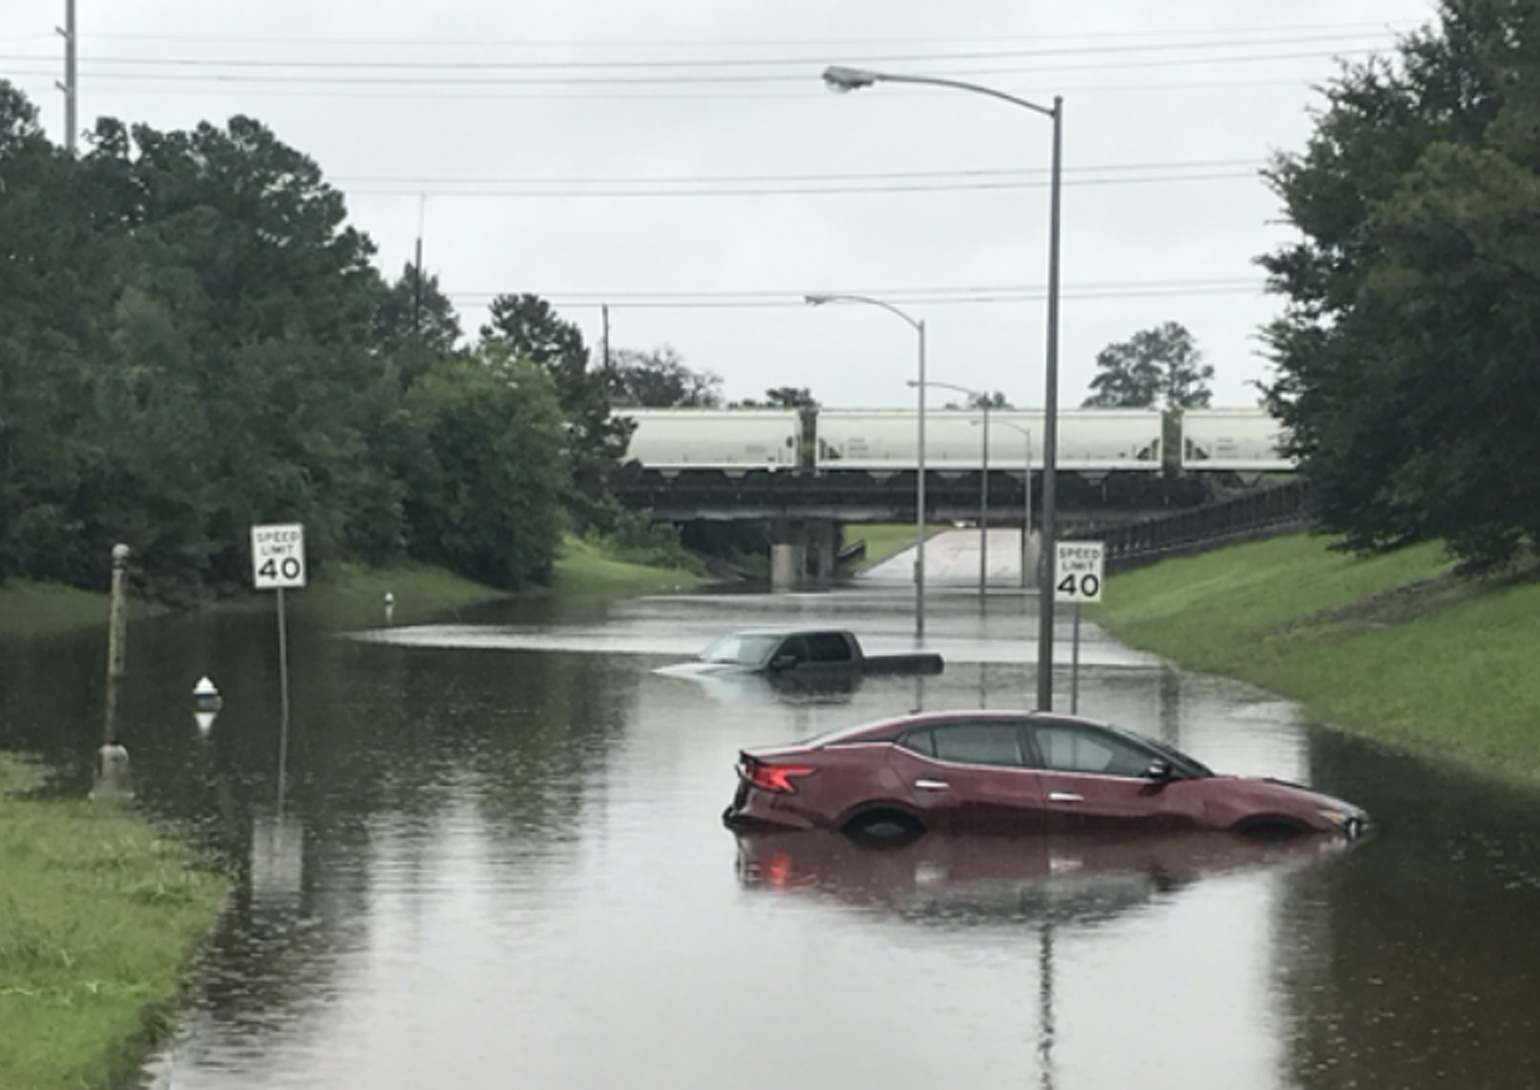 Vehicles in floodwater